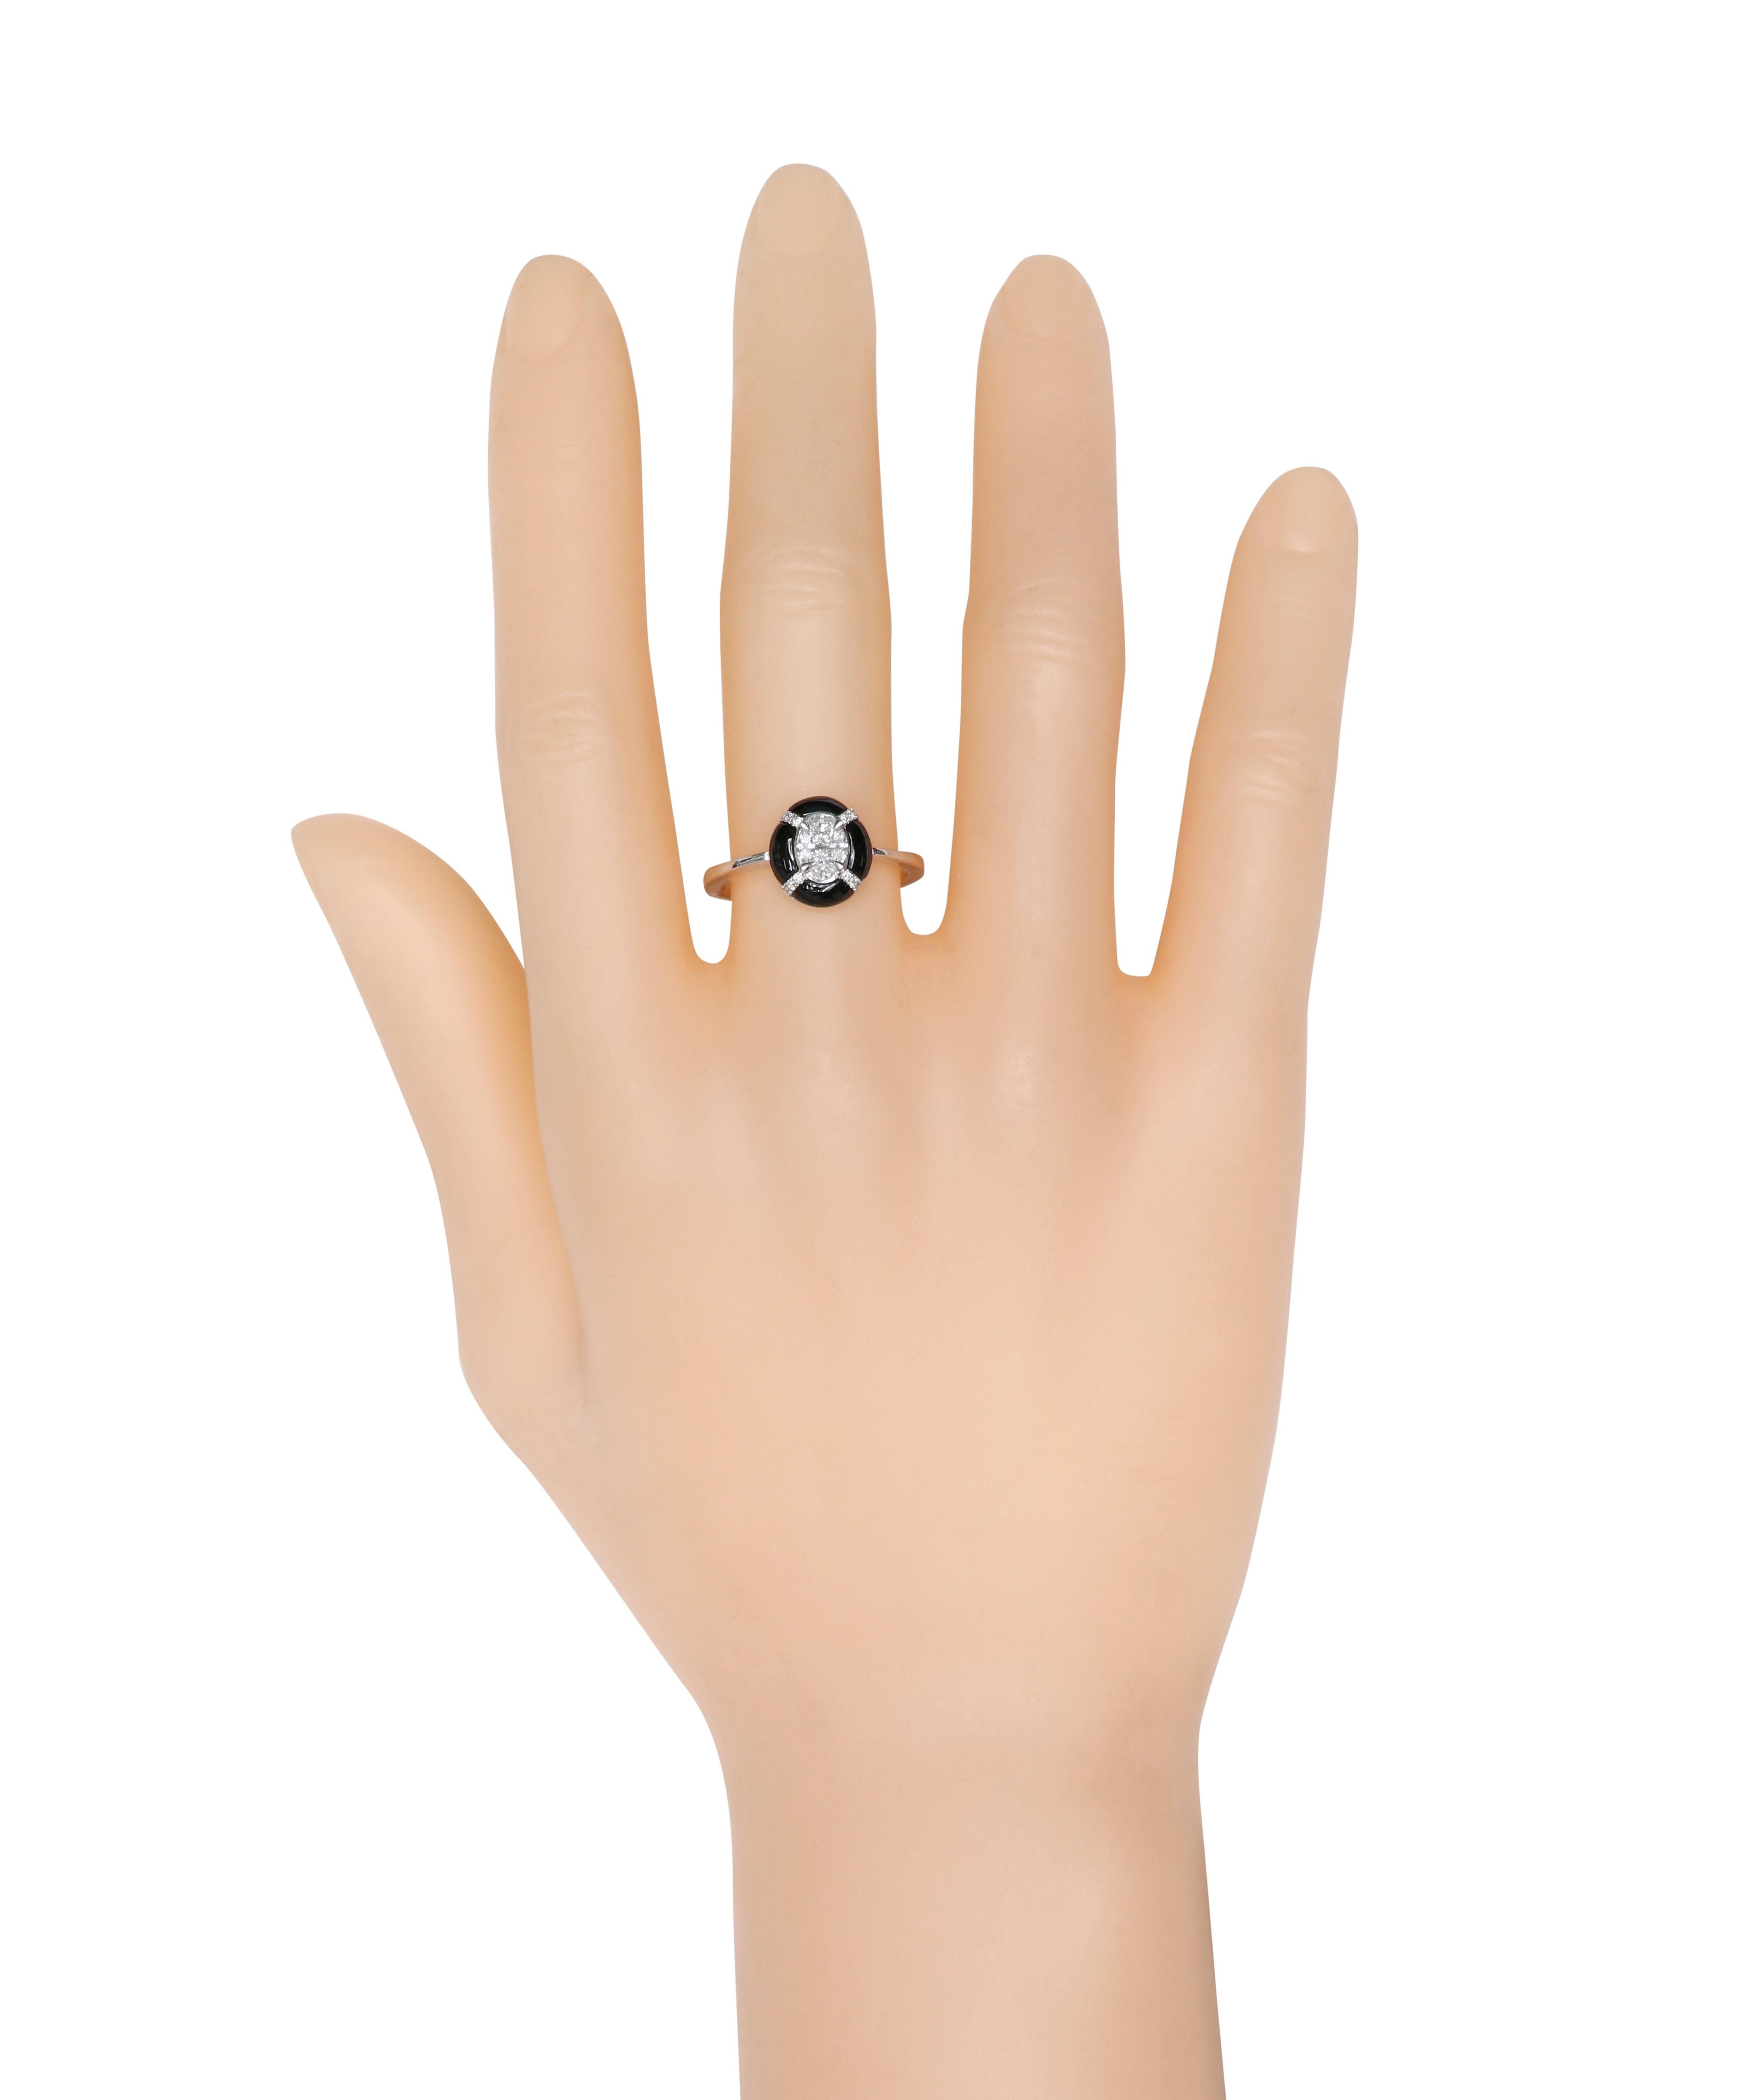 18 Karat White Gold 1.70 Carat Diamond and Black Onyx Engagement Ring

Radiance originates from the marquise and princess cut diamond center of this exclusive ring, capturing attention at every glance. This aesthetic ring is a promise of love,